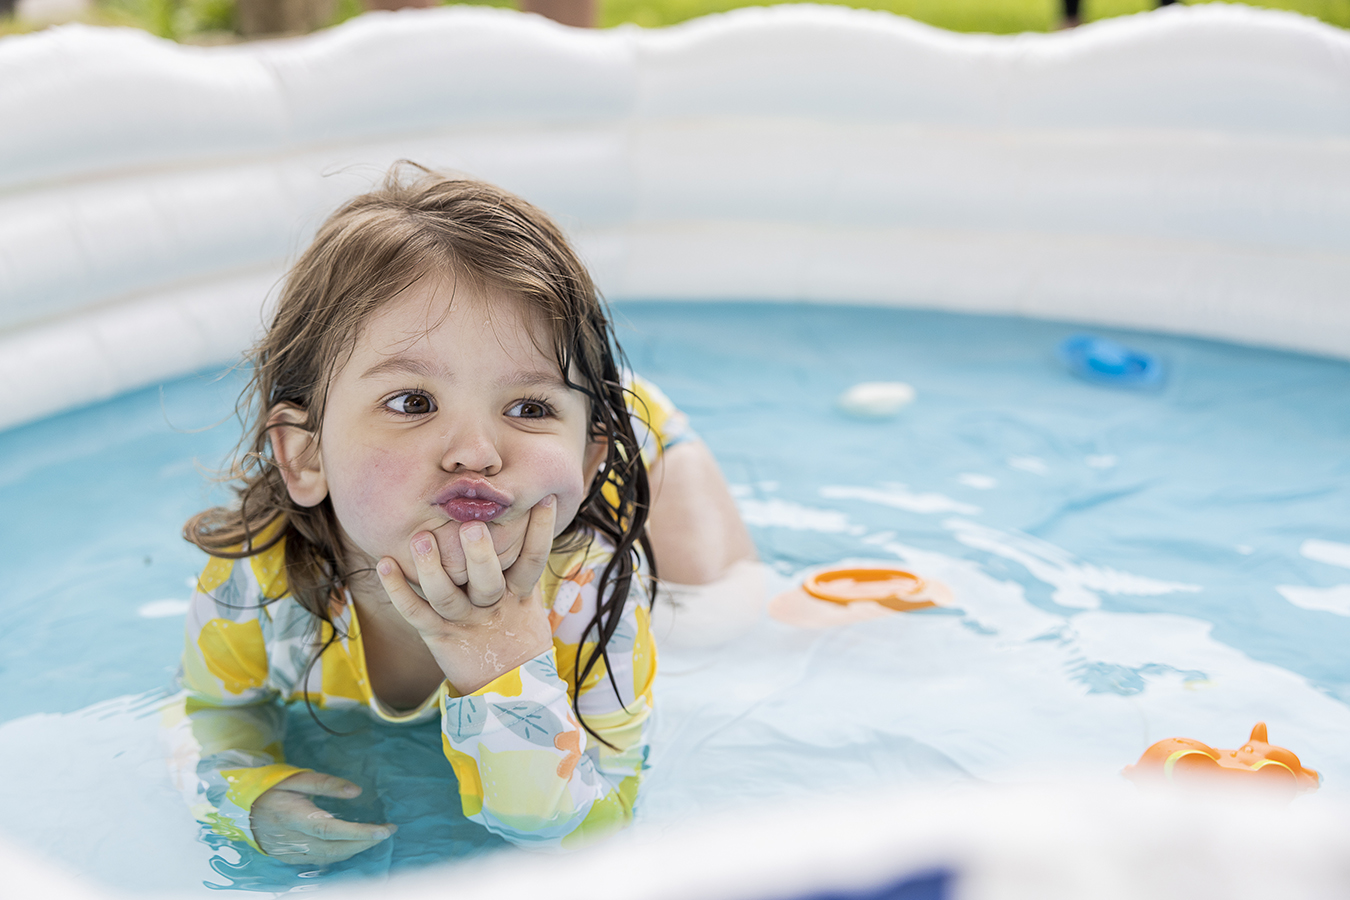 A girl plays in a pool.